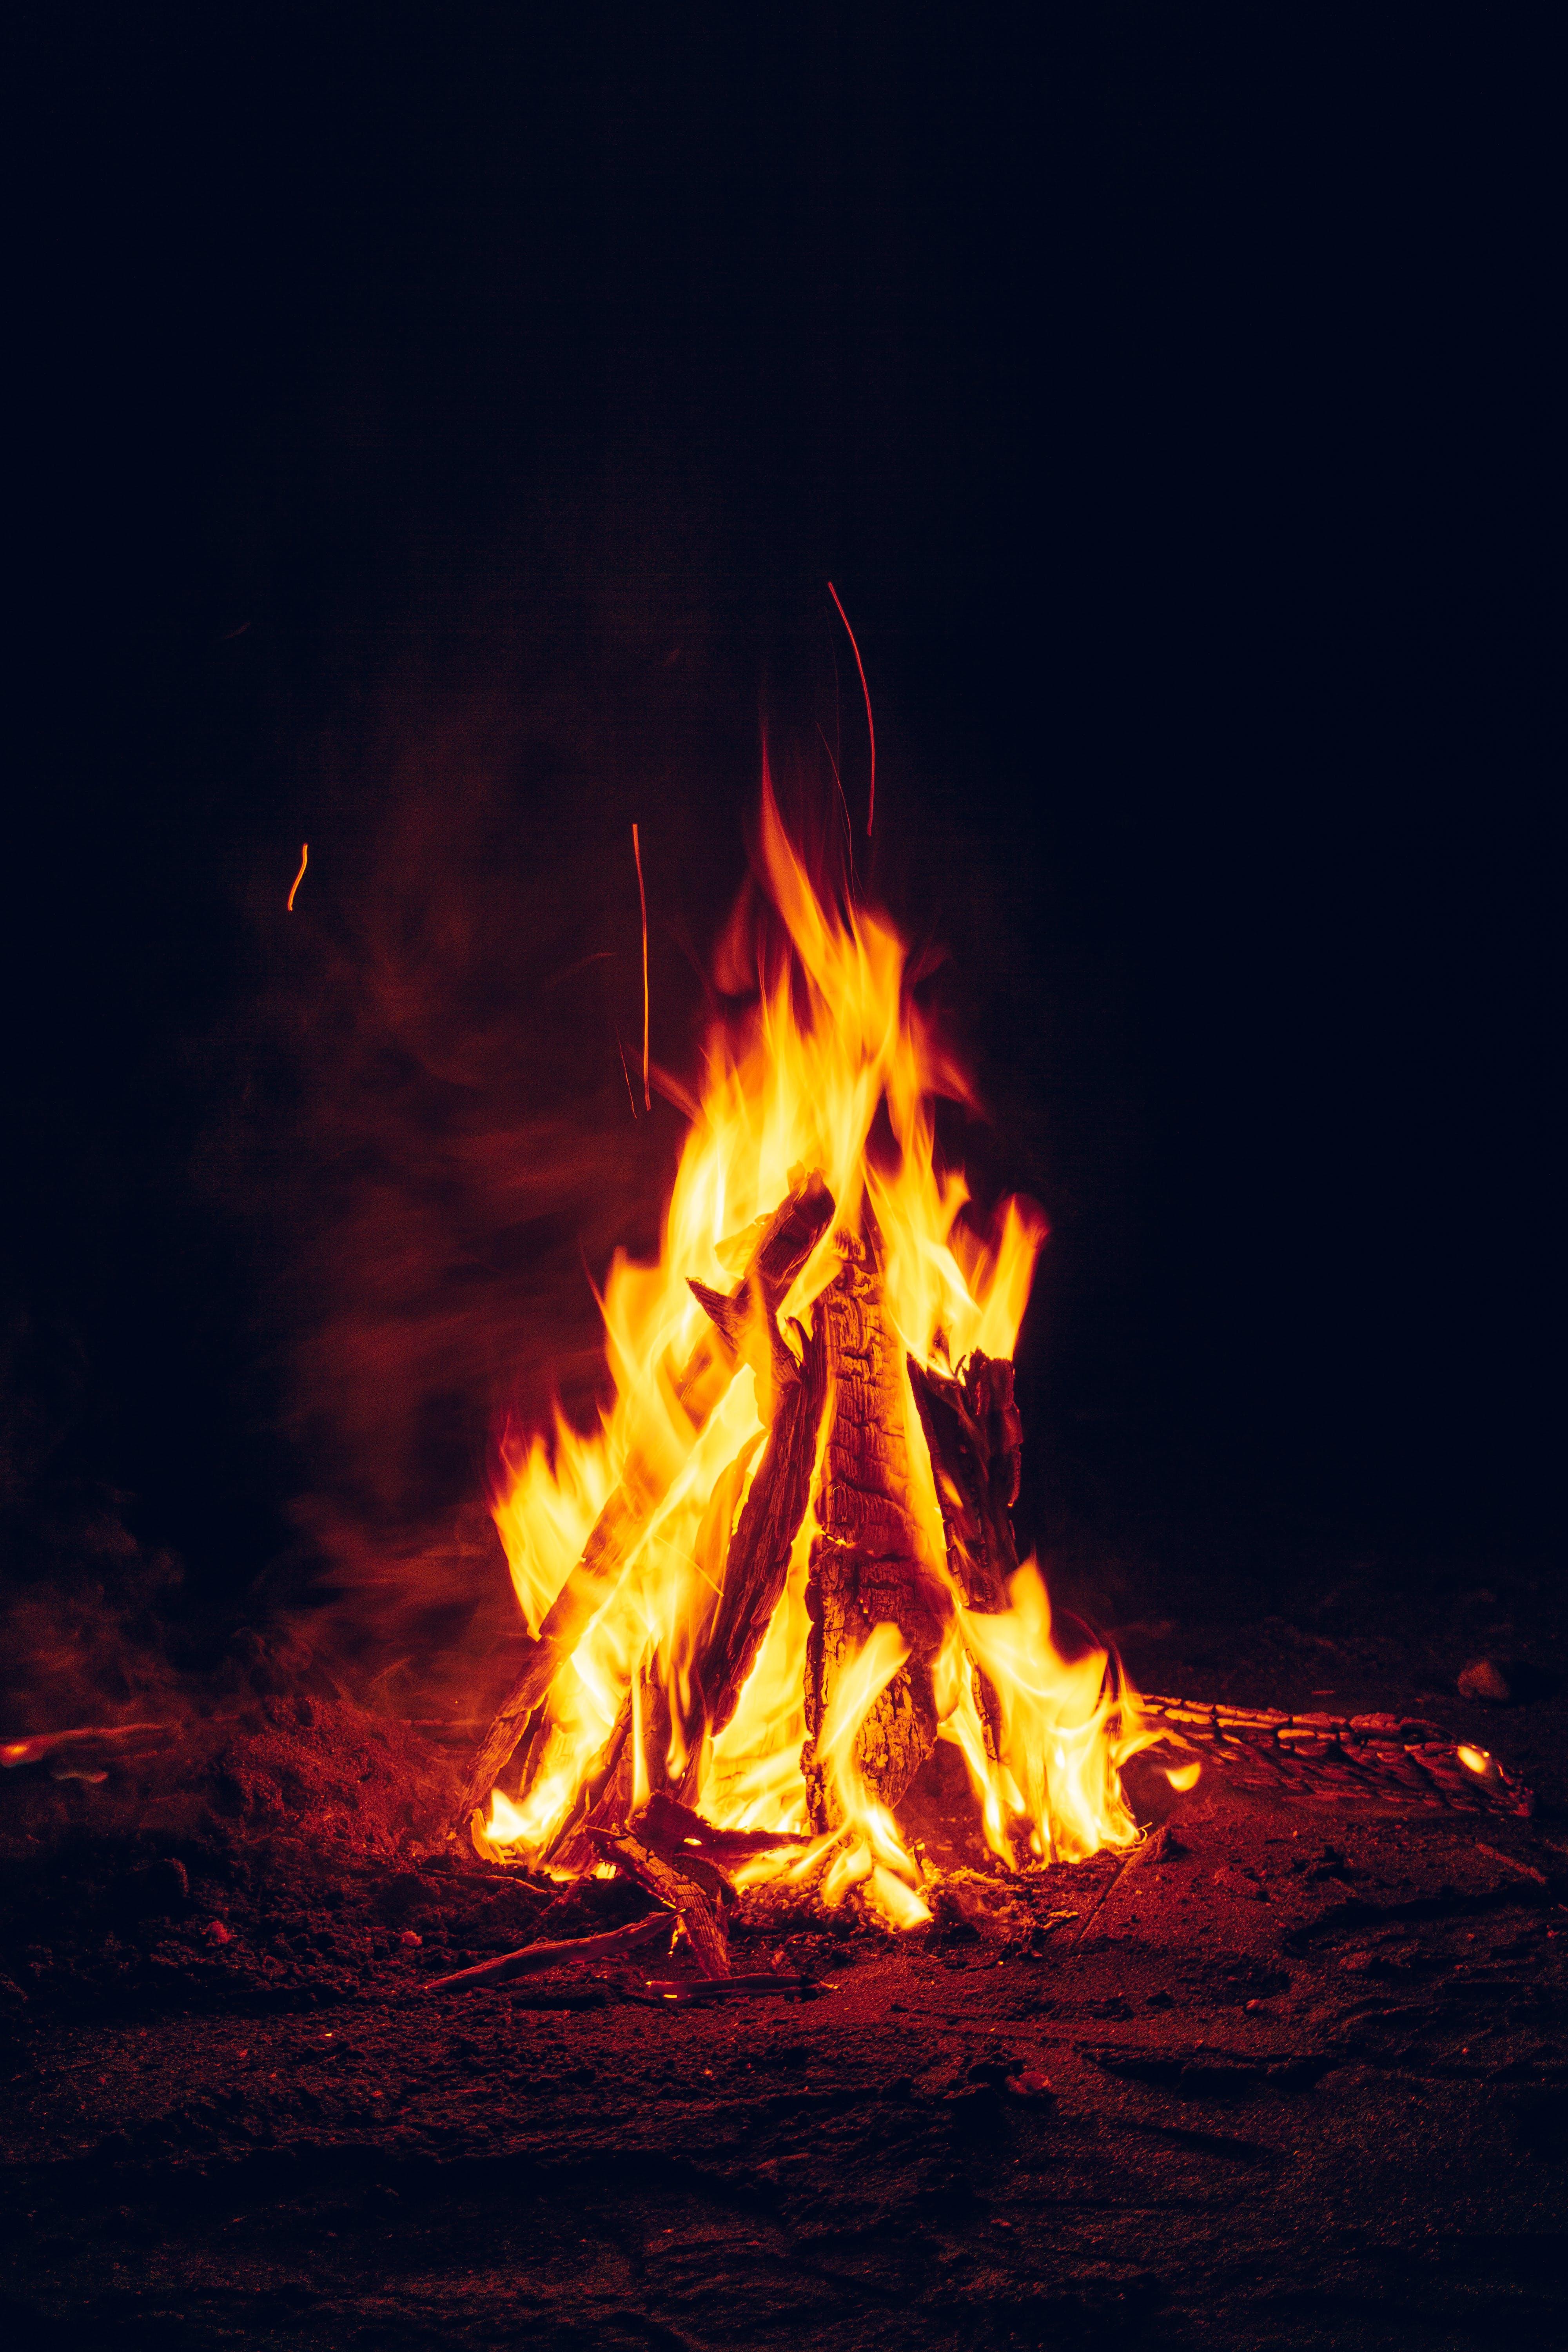 What is the moral of the story to build a fire? 